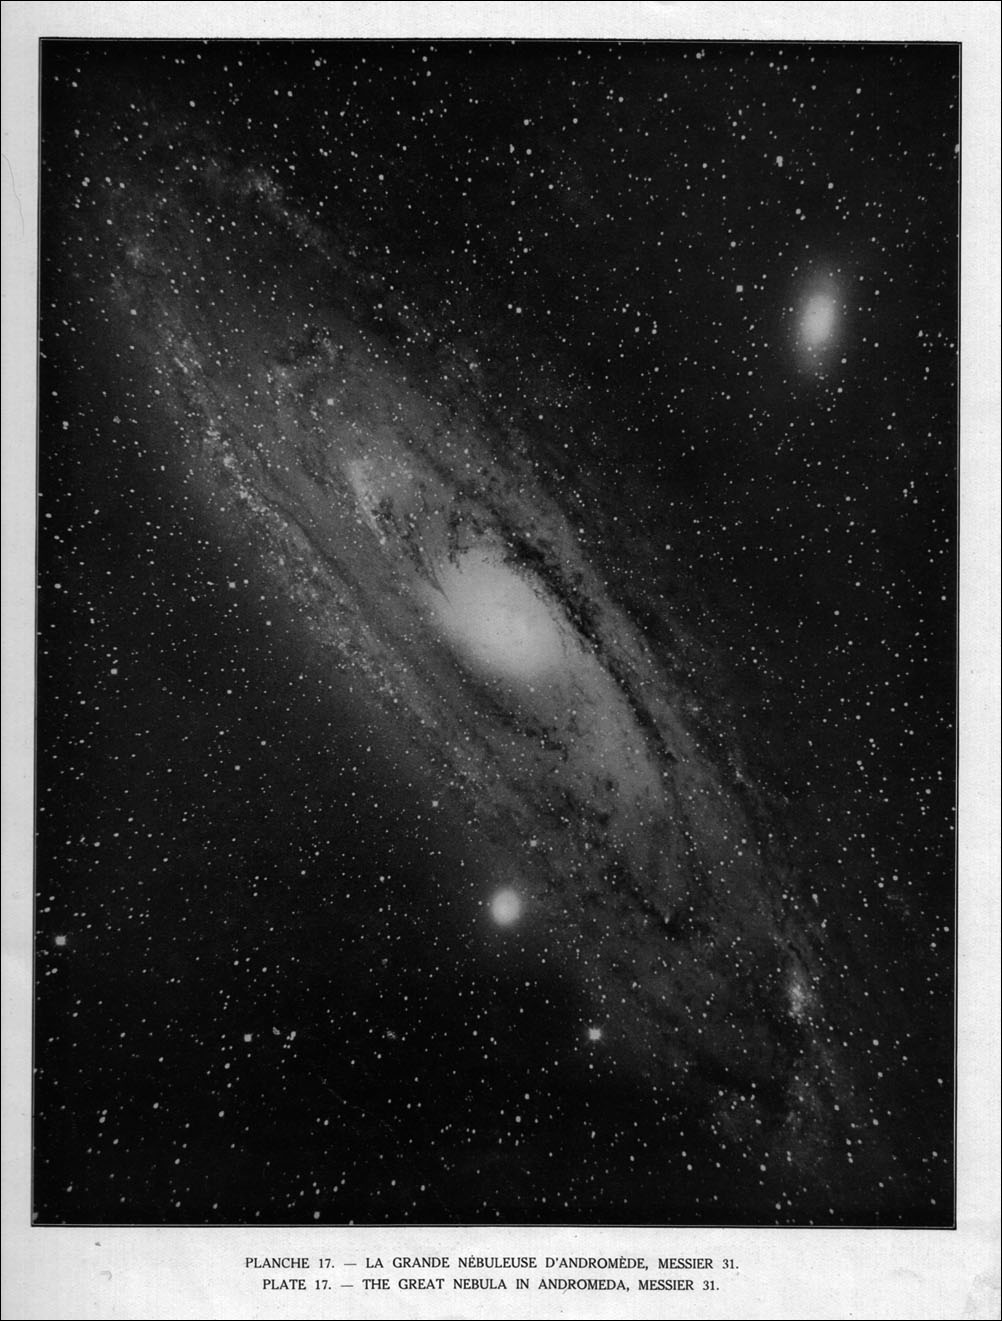 Photograph of M31 by Ritchey (1929)